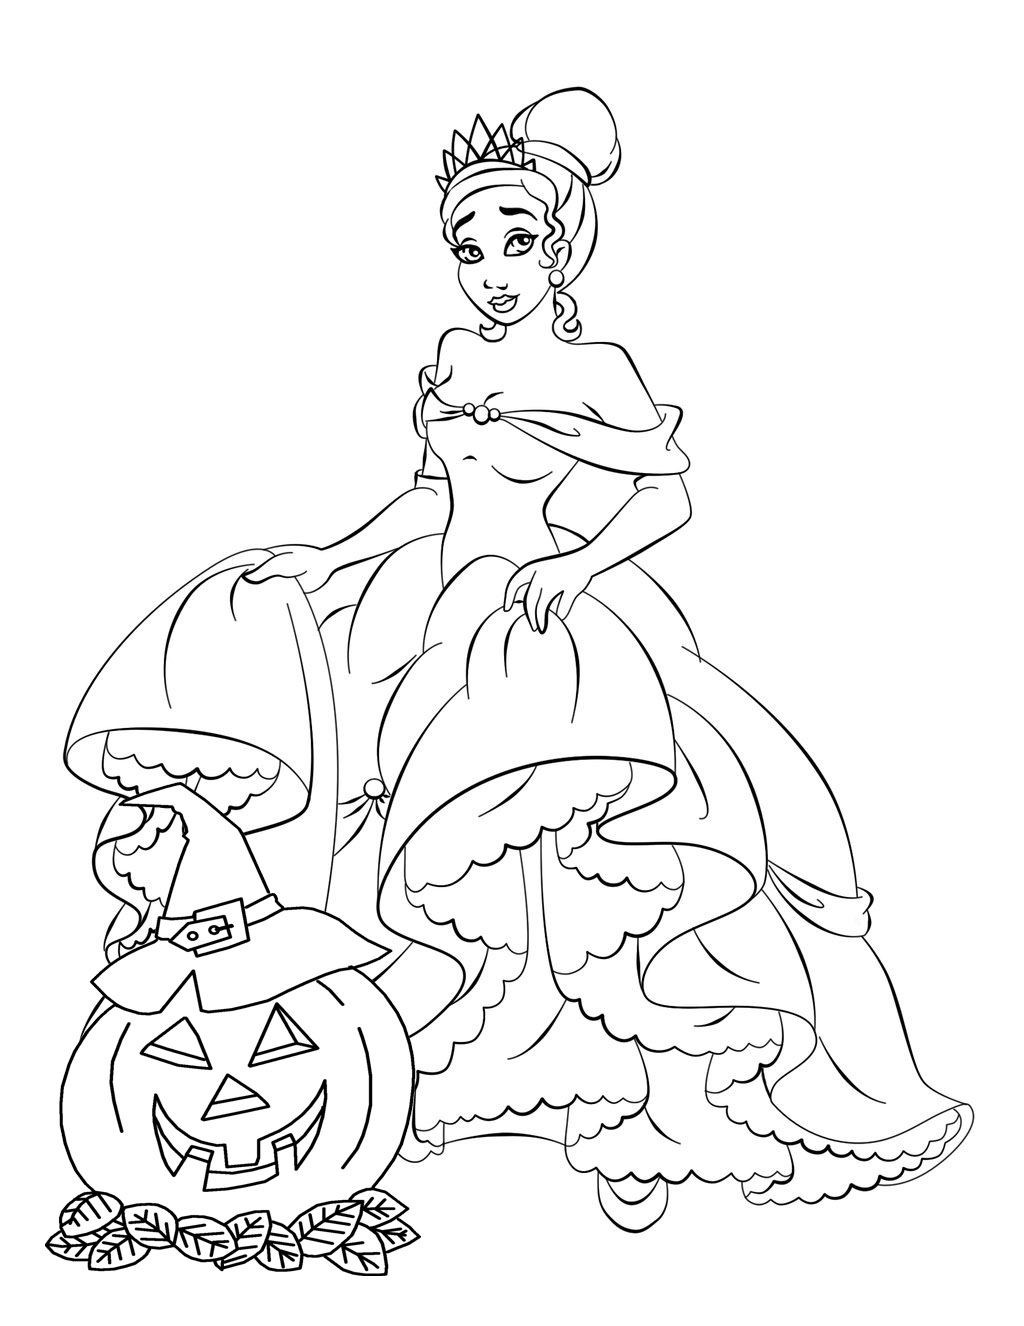 Barbie Halloween Coloring Pages - BubaKids.com